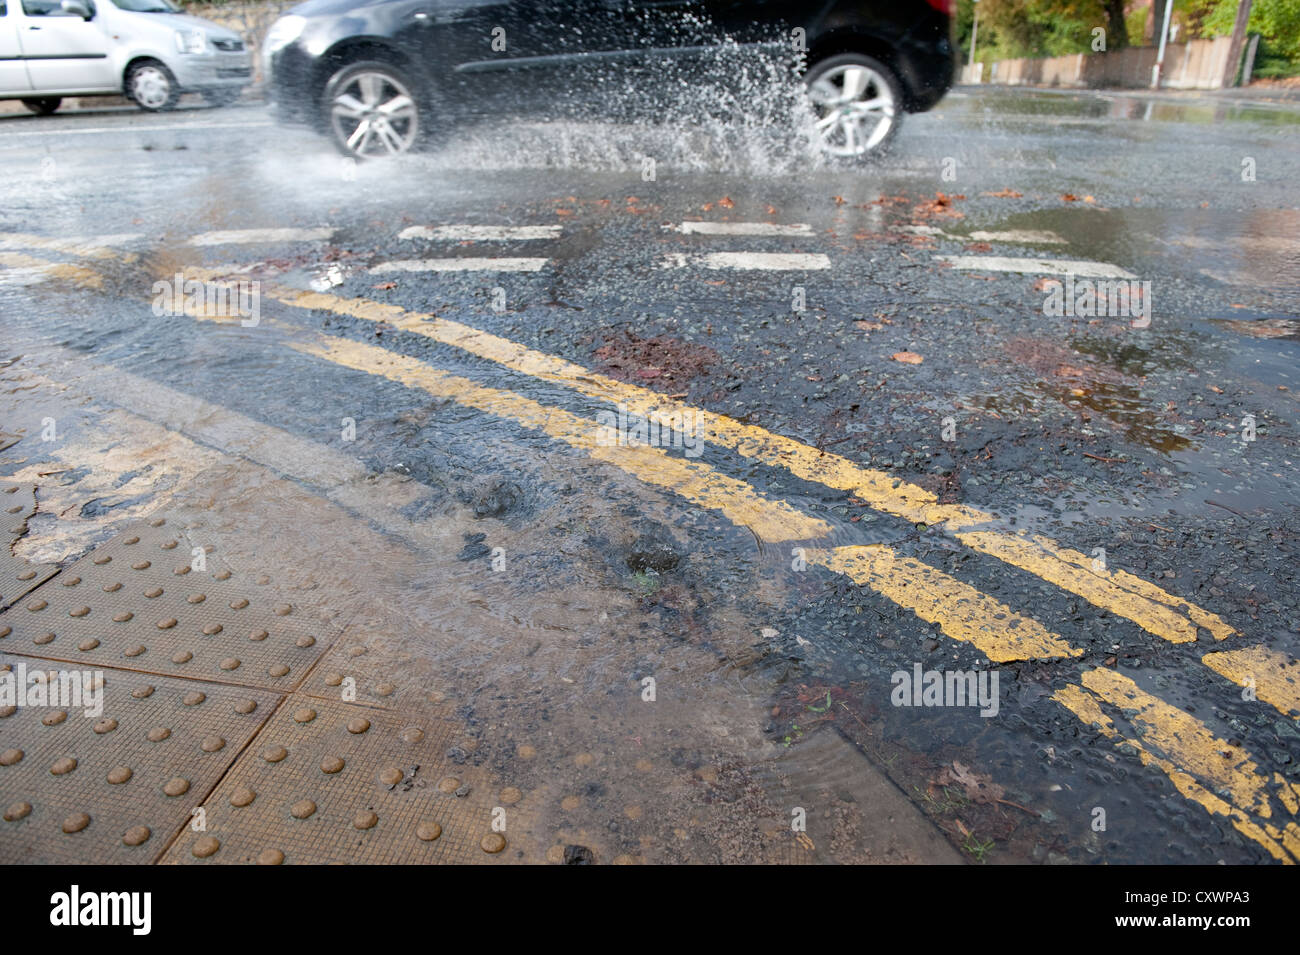 Burst water main pipe flooding road with cars going past Stock Photo